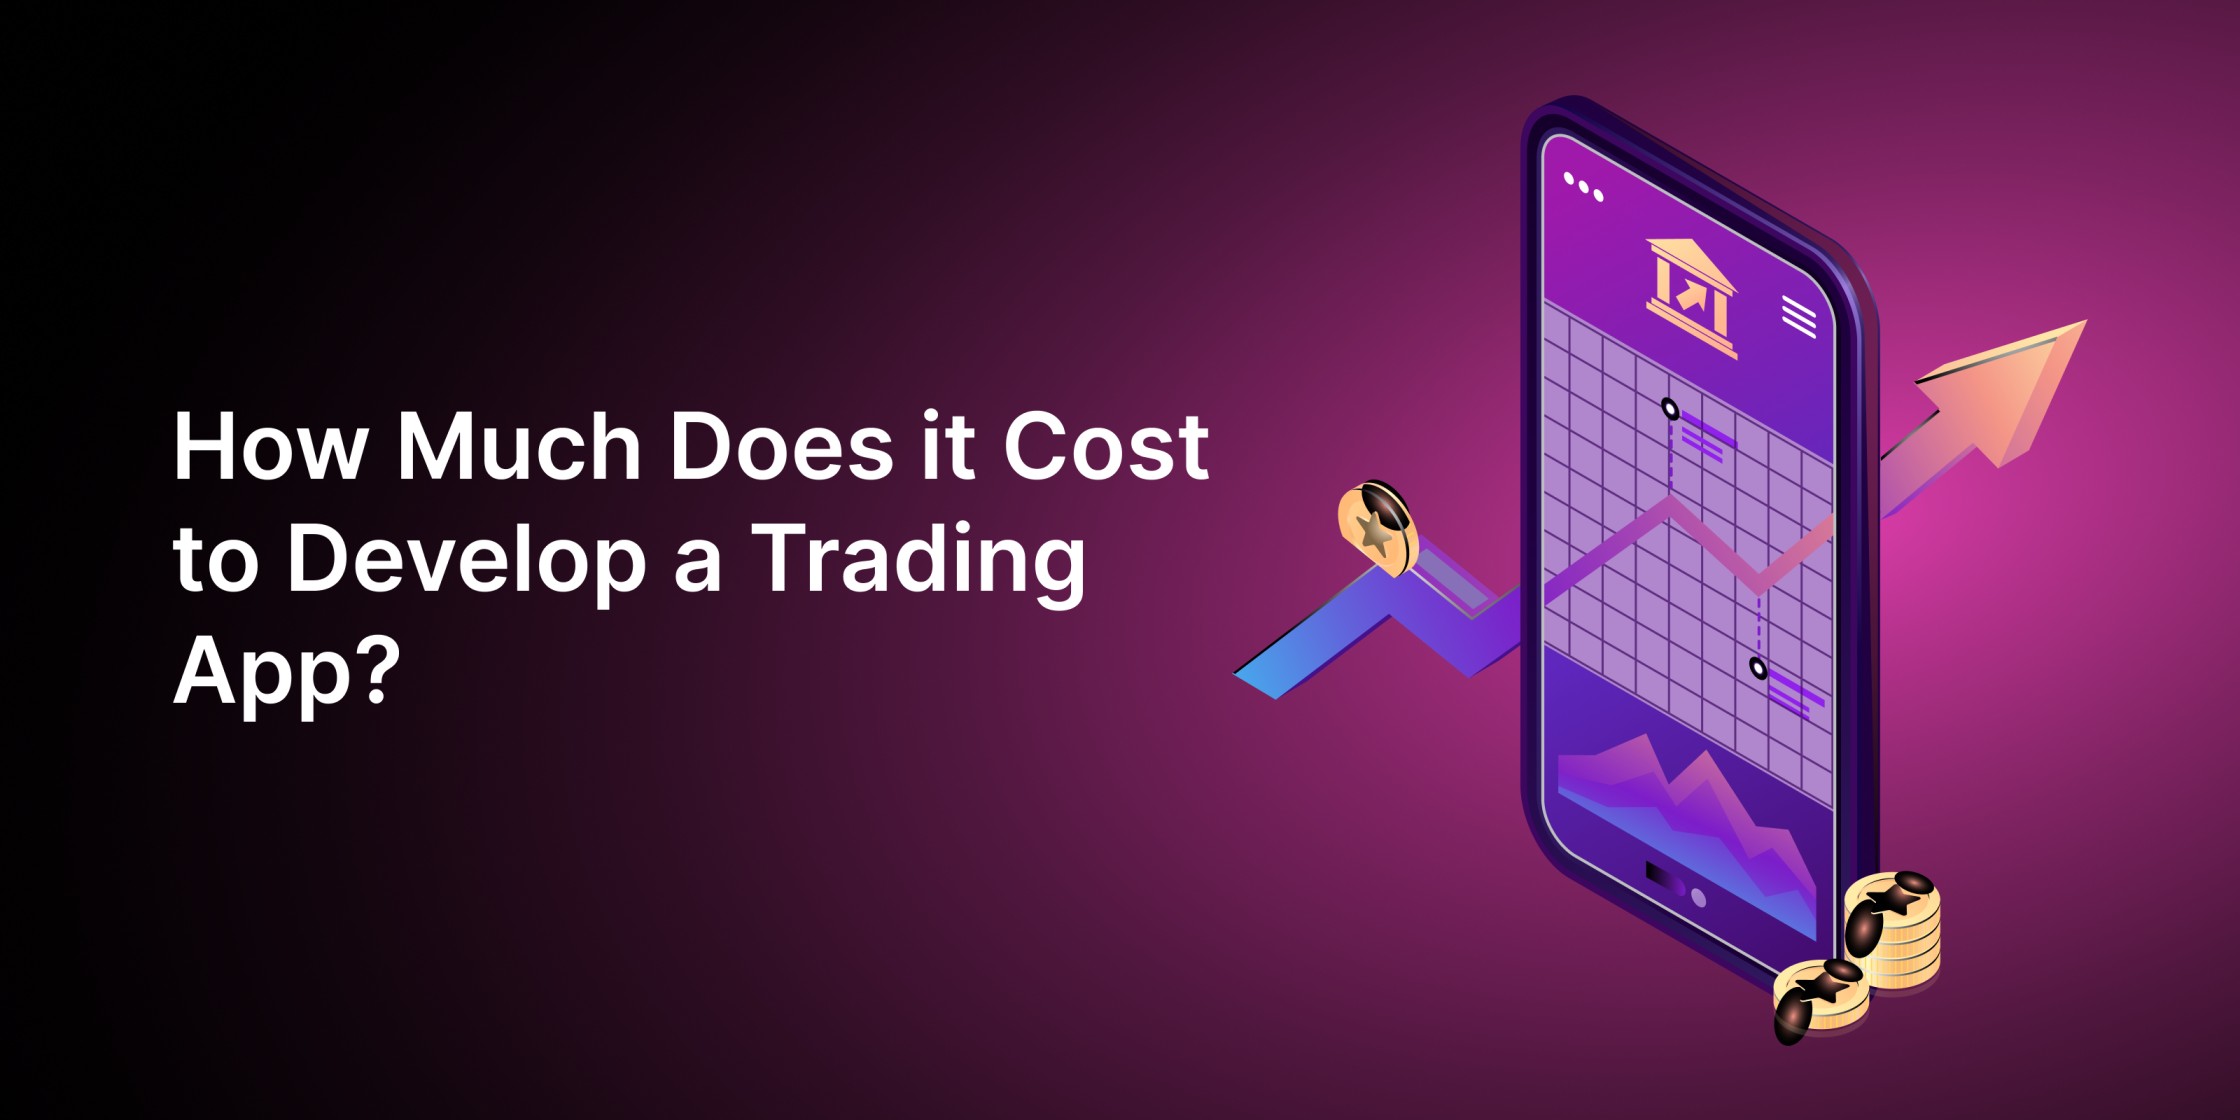 Title image for the cost of developing a trading app showcasing an illustration of a trading app